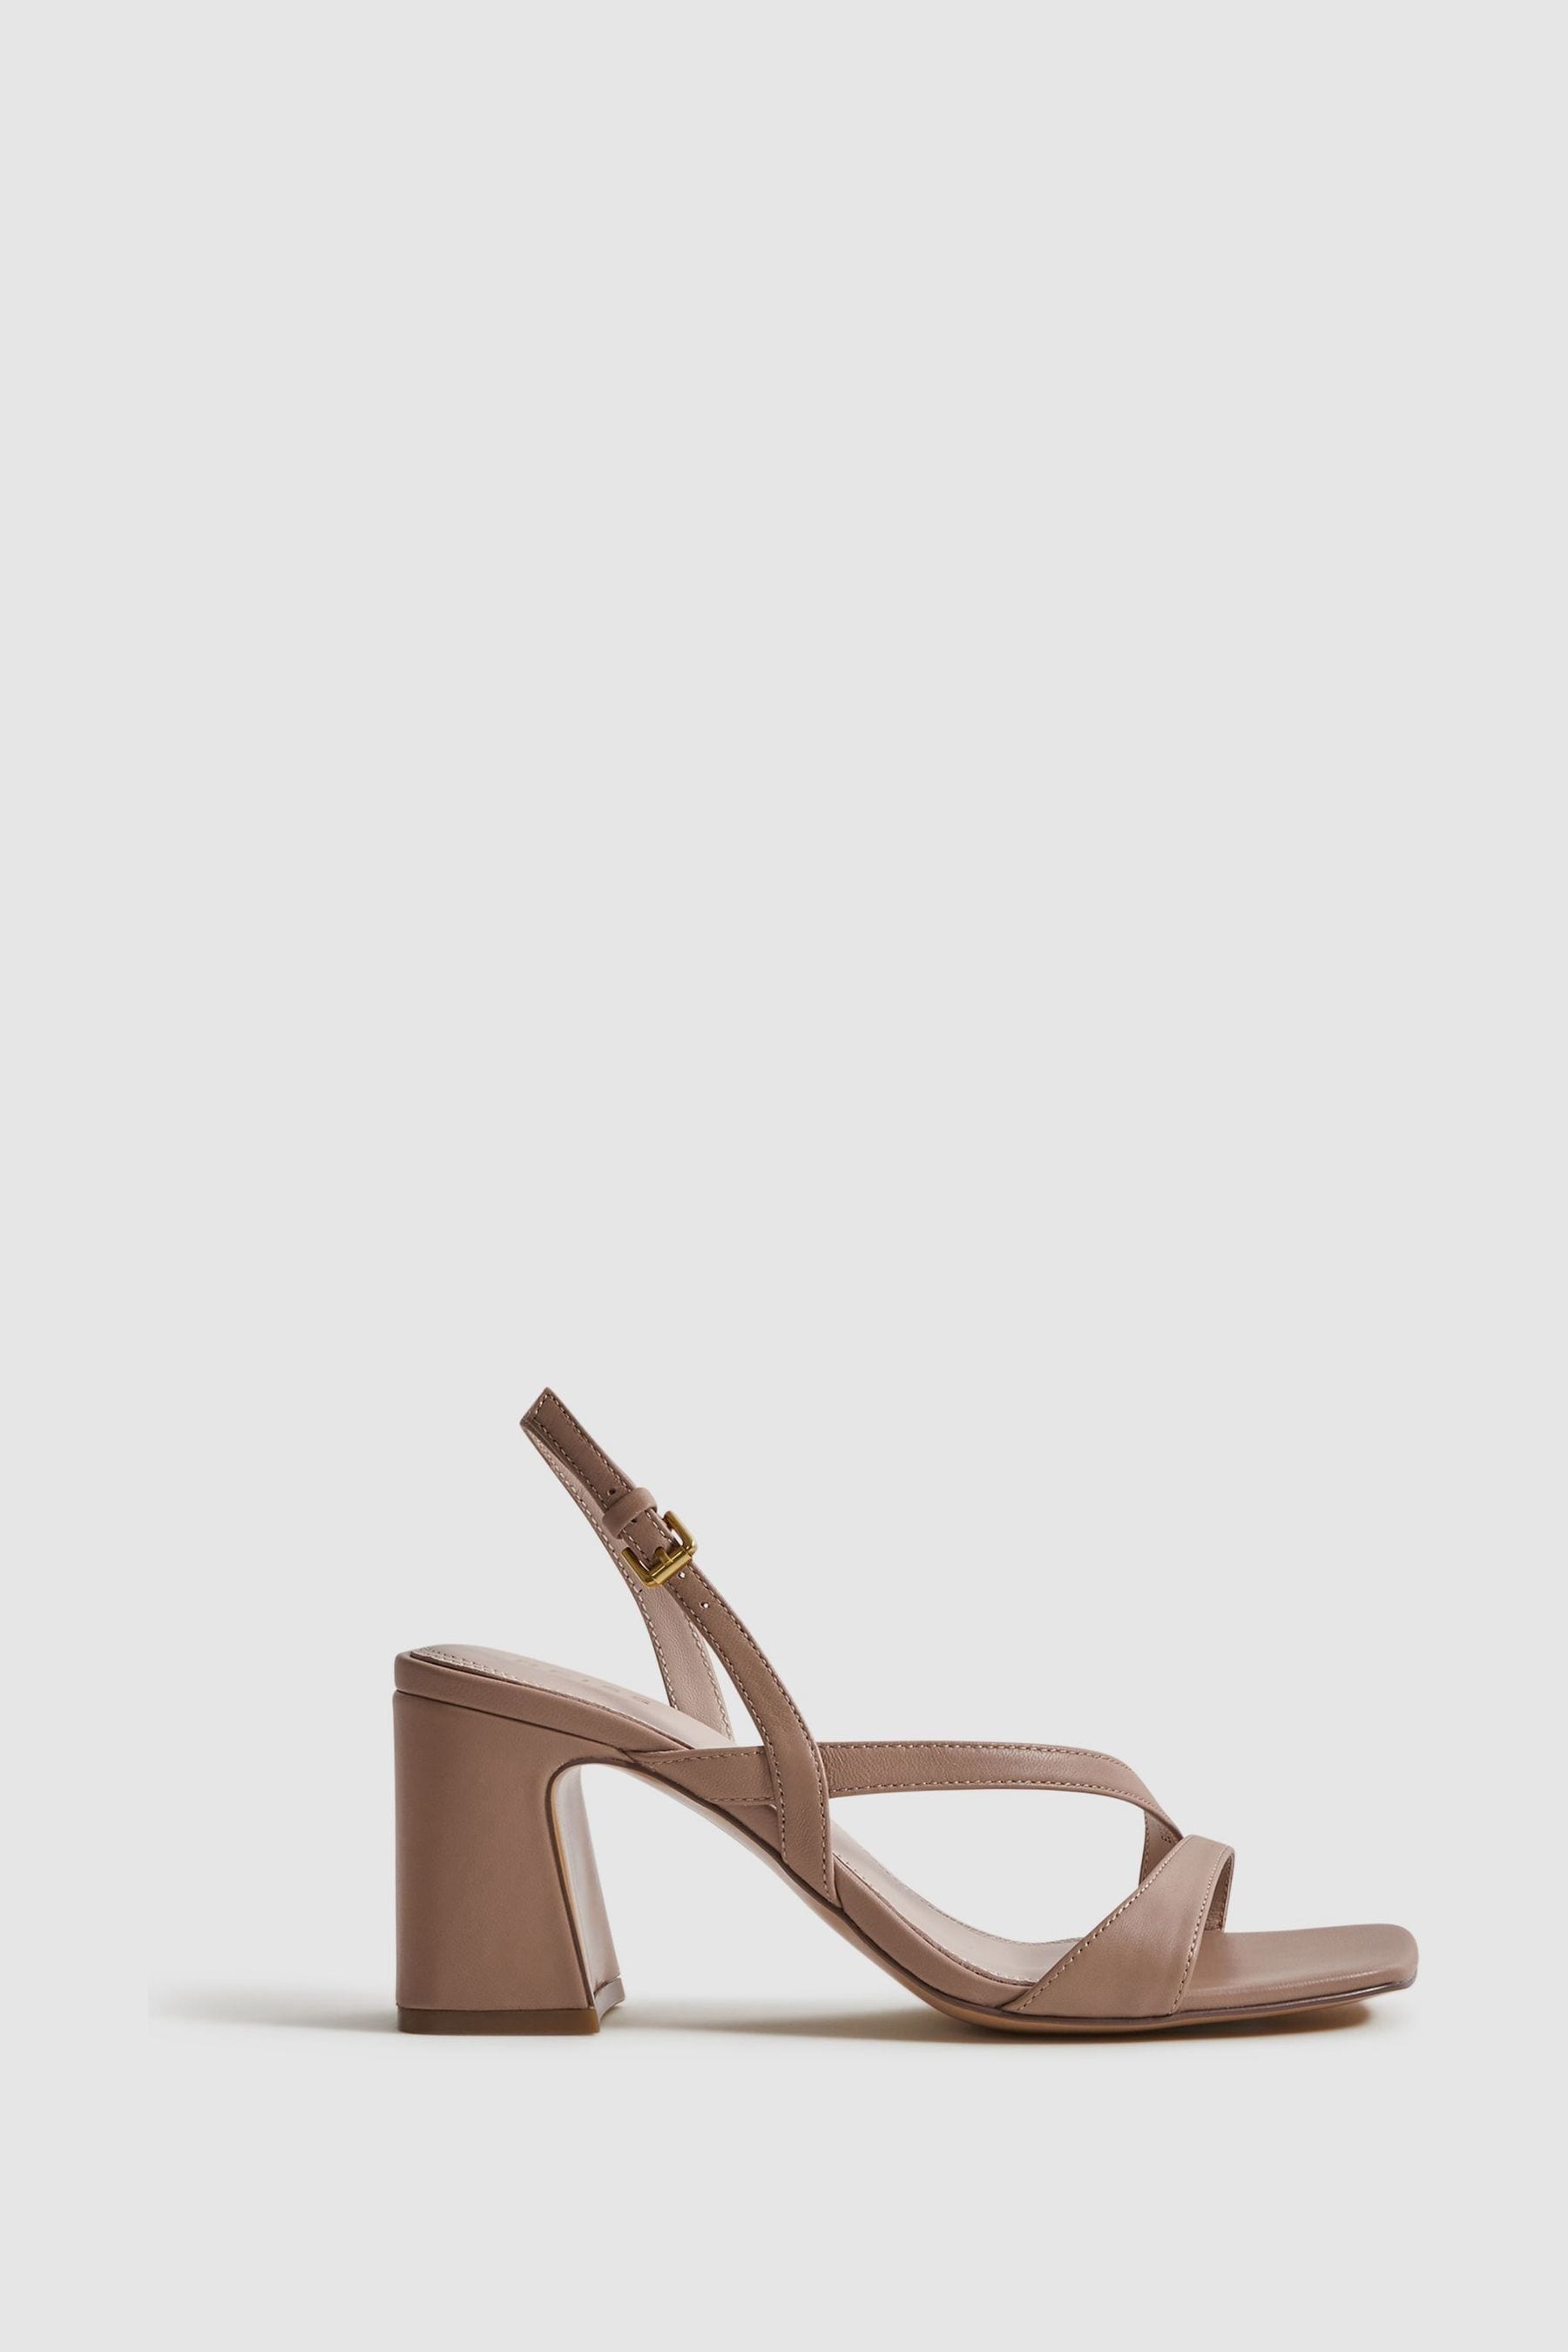 Reiss Alice - Nude Strappy Leather Heeled Sandals, Uk 8 Eu 41